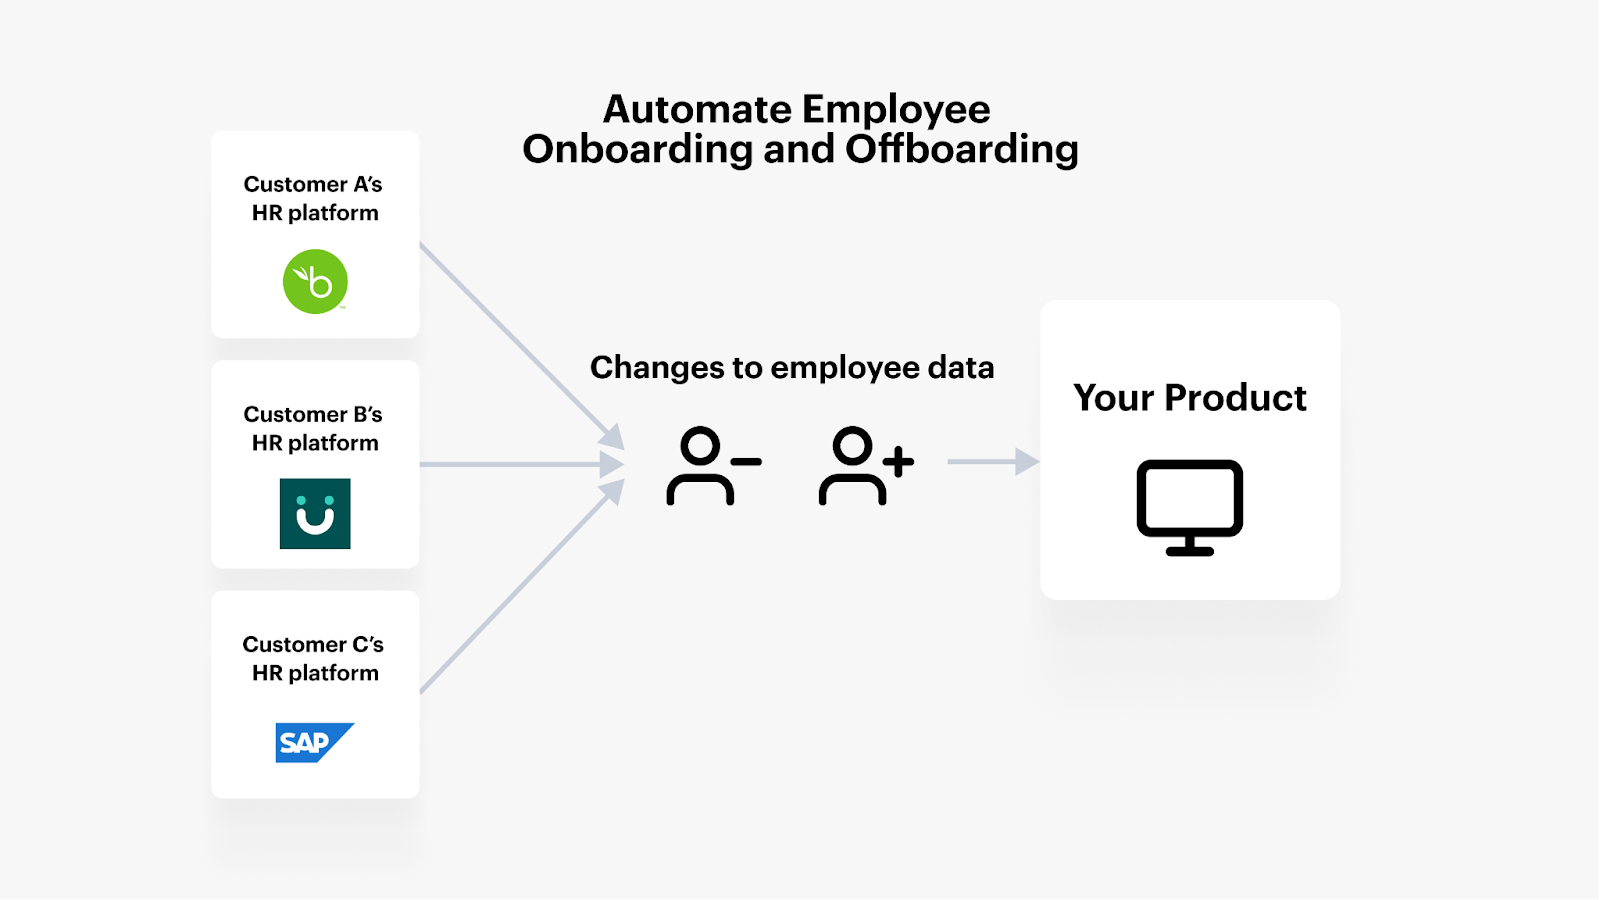 A visual breakdown of automating employee onboarding and offboarding with your product